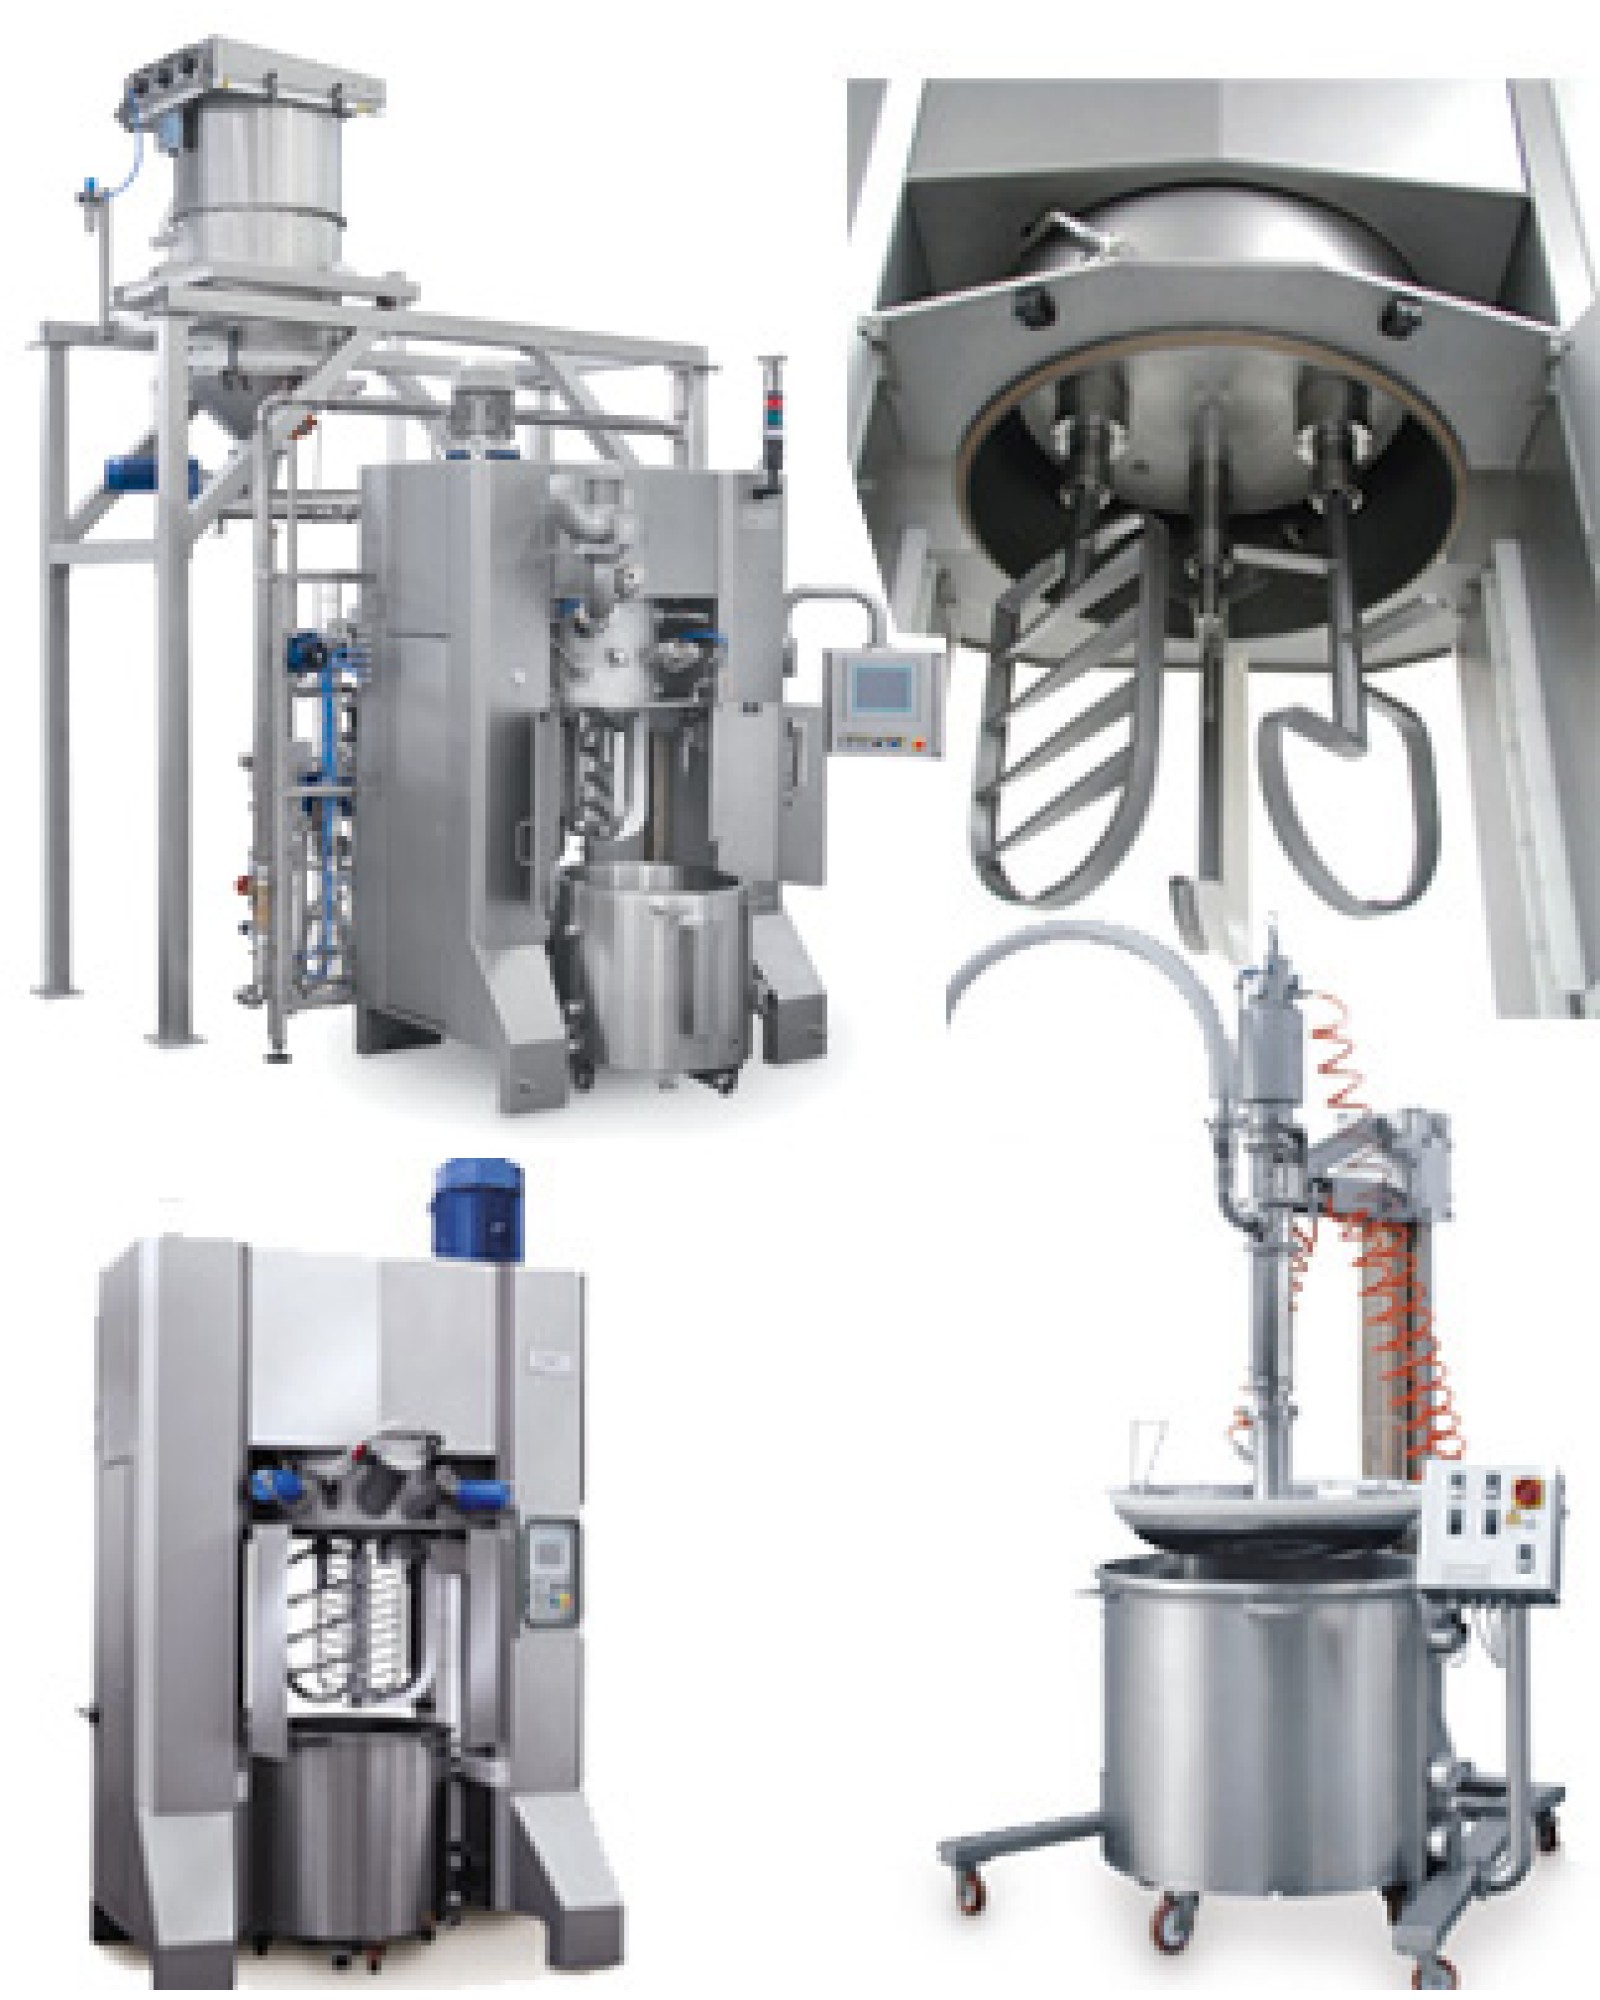 Tonelli Planetary Mixers (Wholesale bakeries) EXPORT ONLY